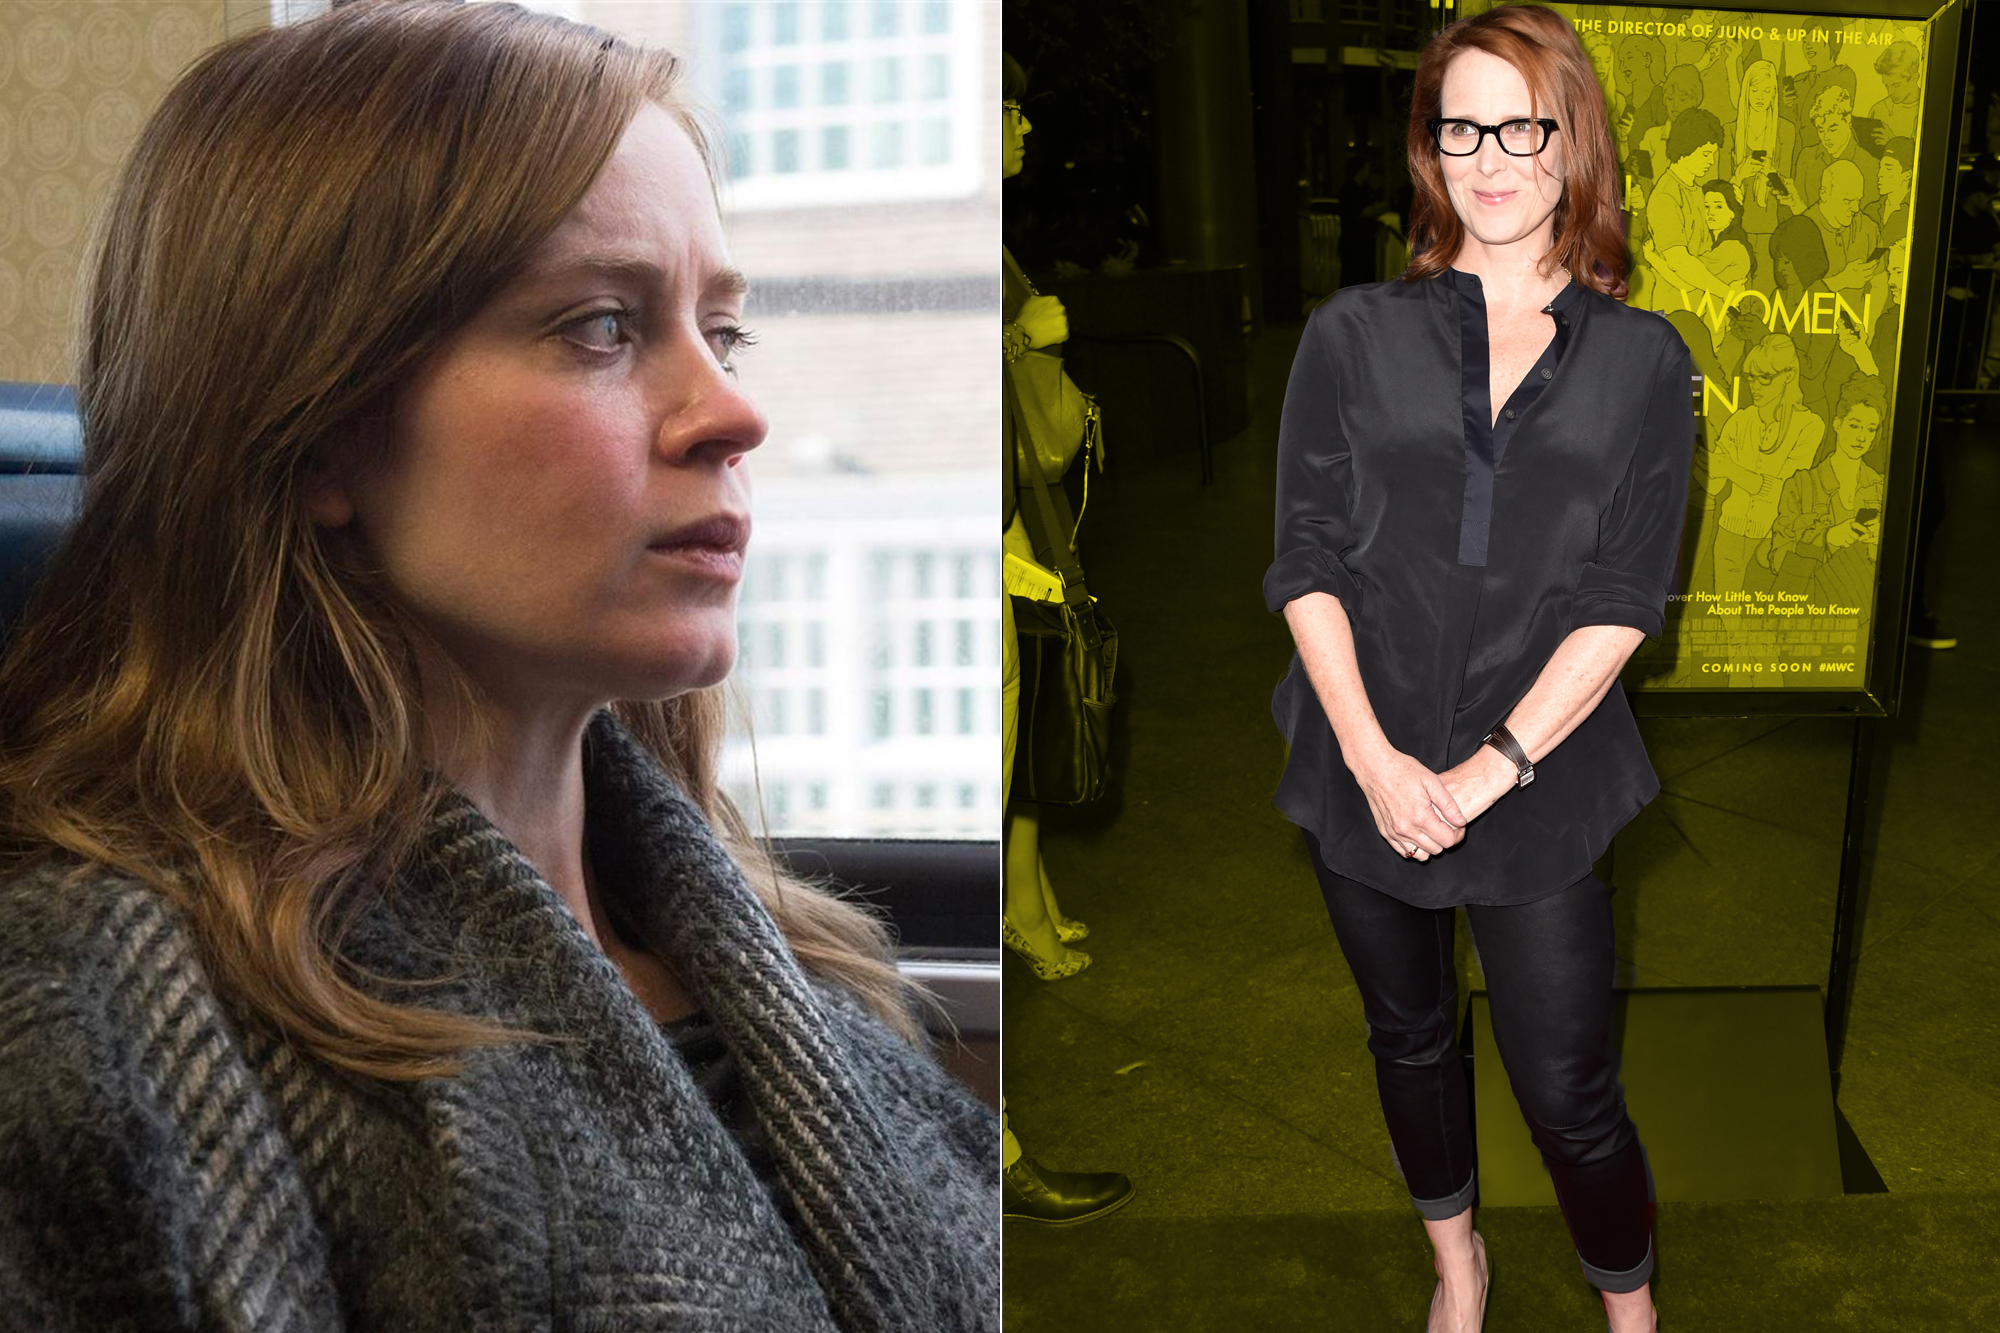 Erin Cressida Wilson, the writer behind Secretary, is adapting Paula Hawkins' The Girl on the Train with Emily Blunt as the movie's star. Release date: Oct. 7